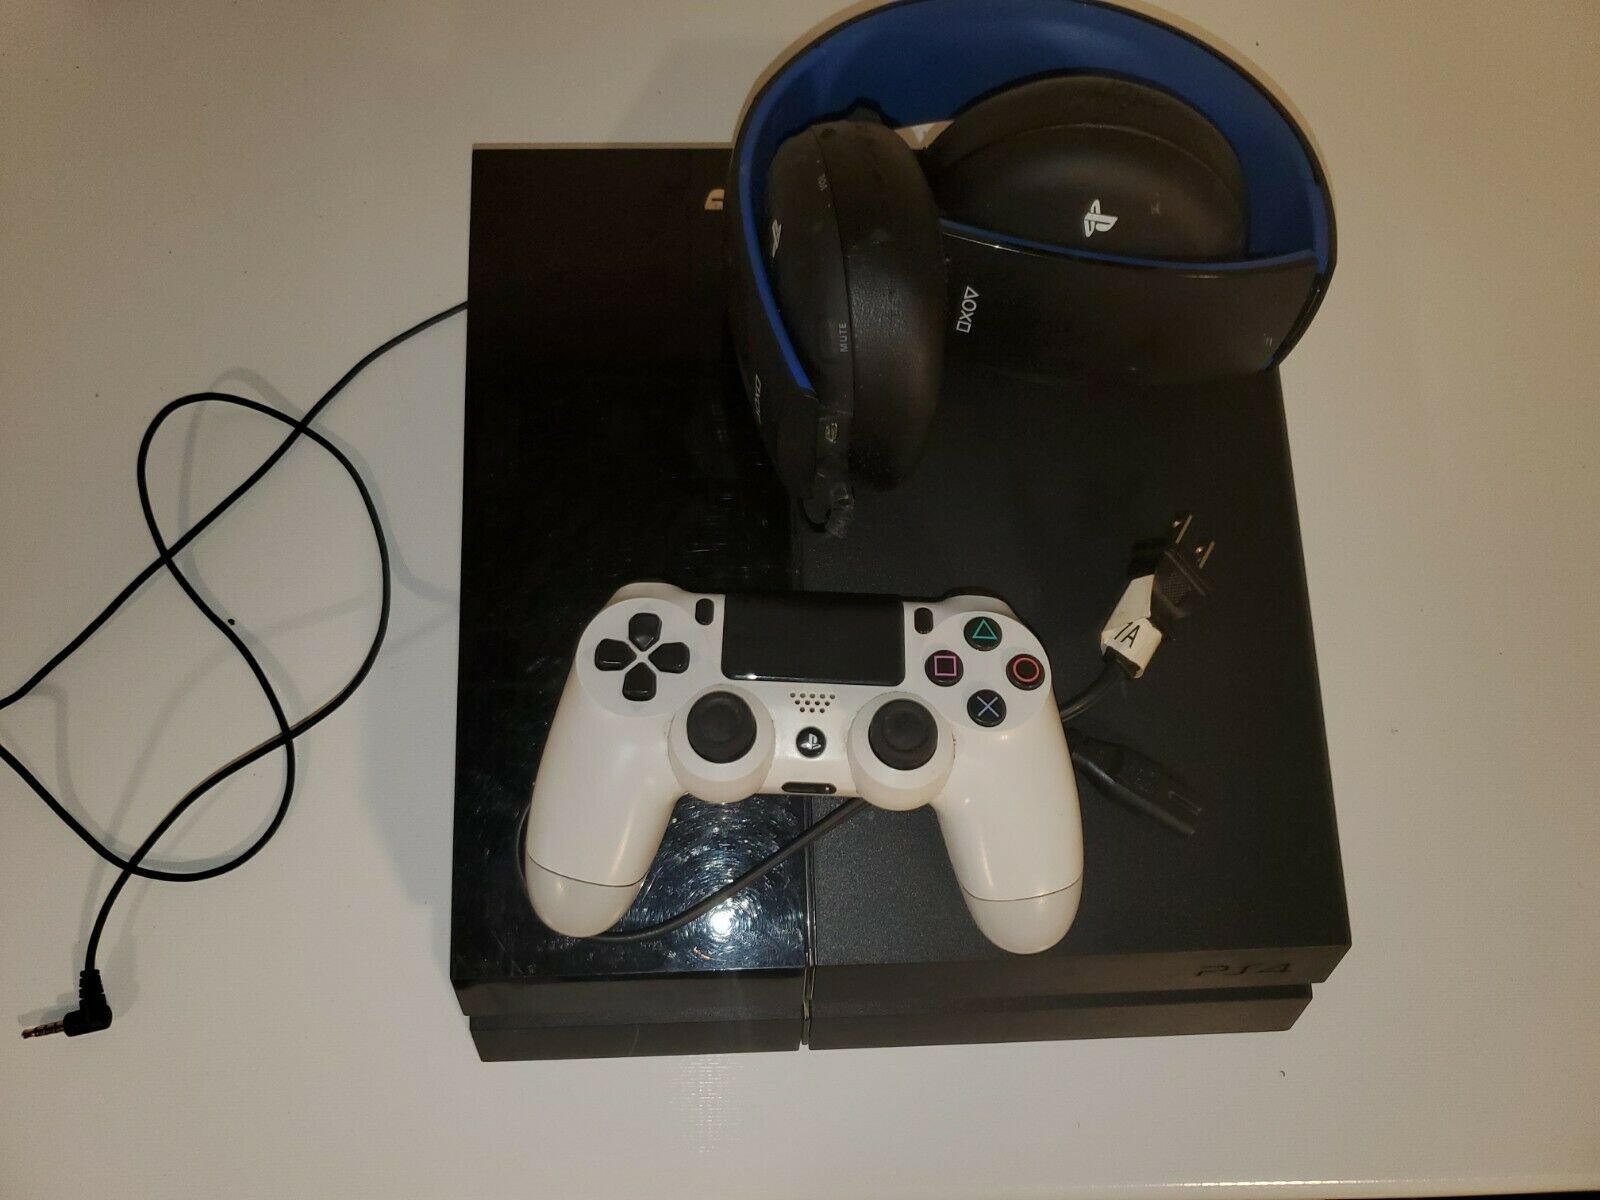 Used Ps4 Console 500Gb W/ Controller And Headset - True Median pour Ps4 Refurbished